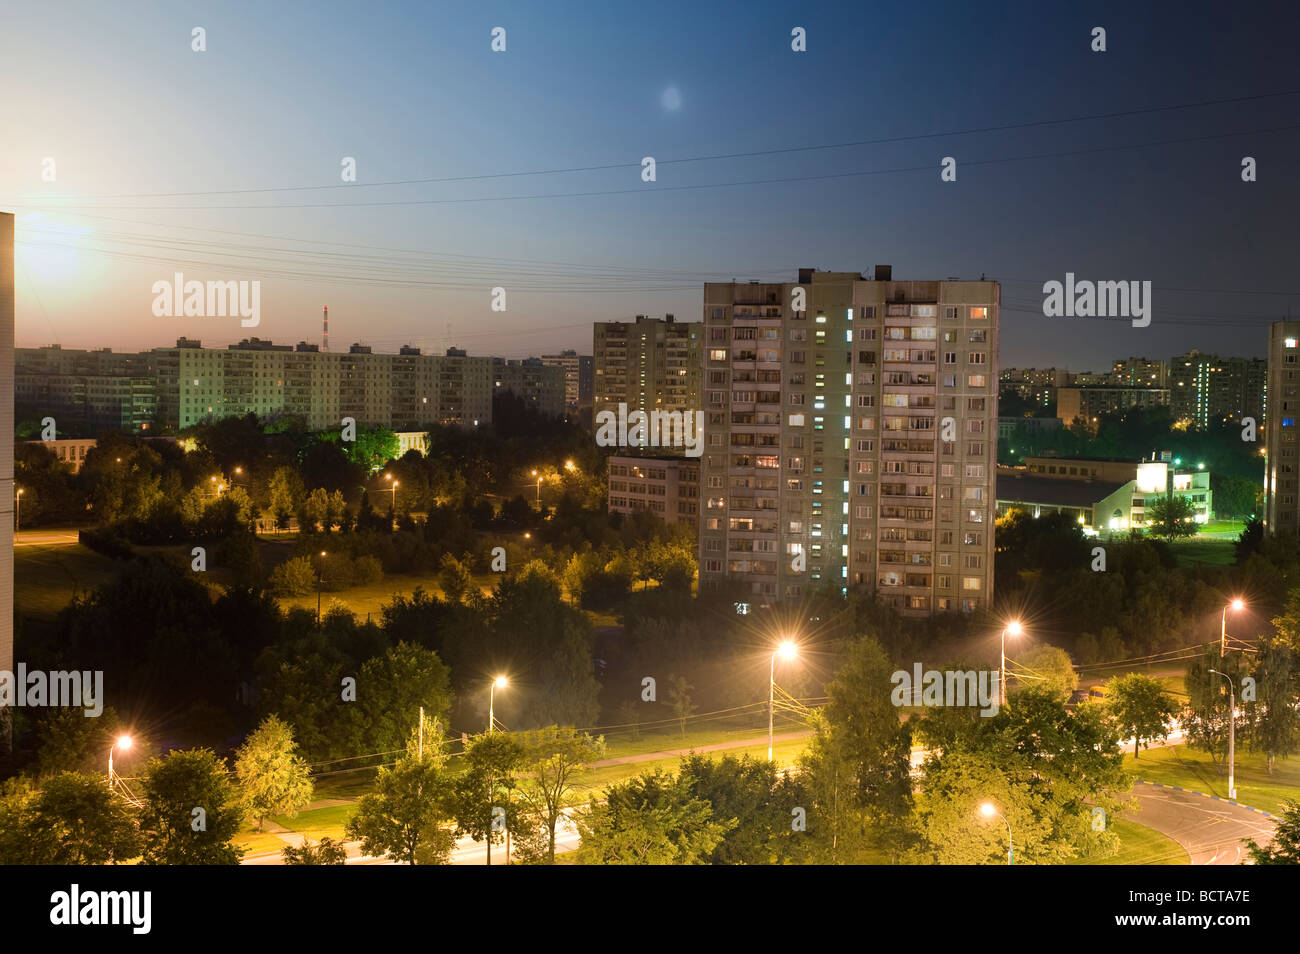 City scenic panel housebuilding in the Day and night Stock Photo